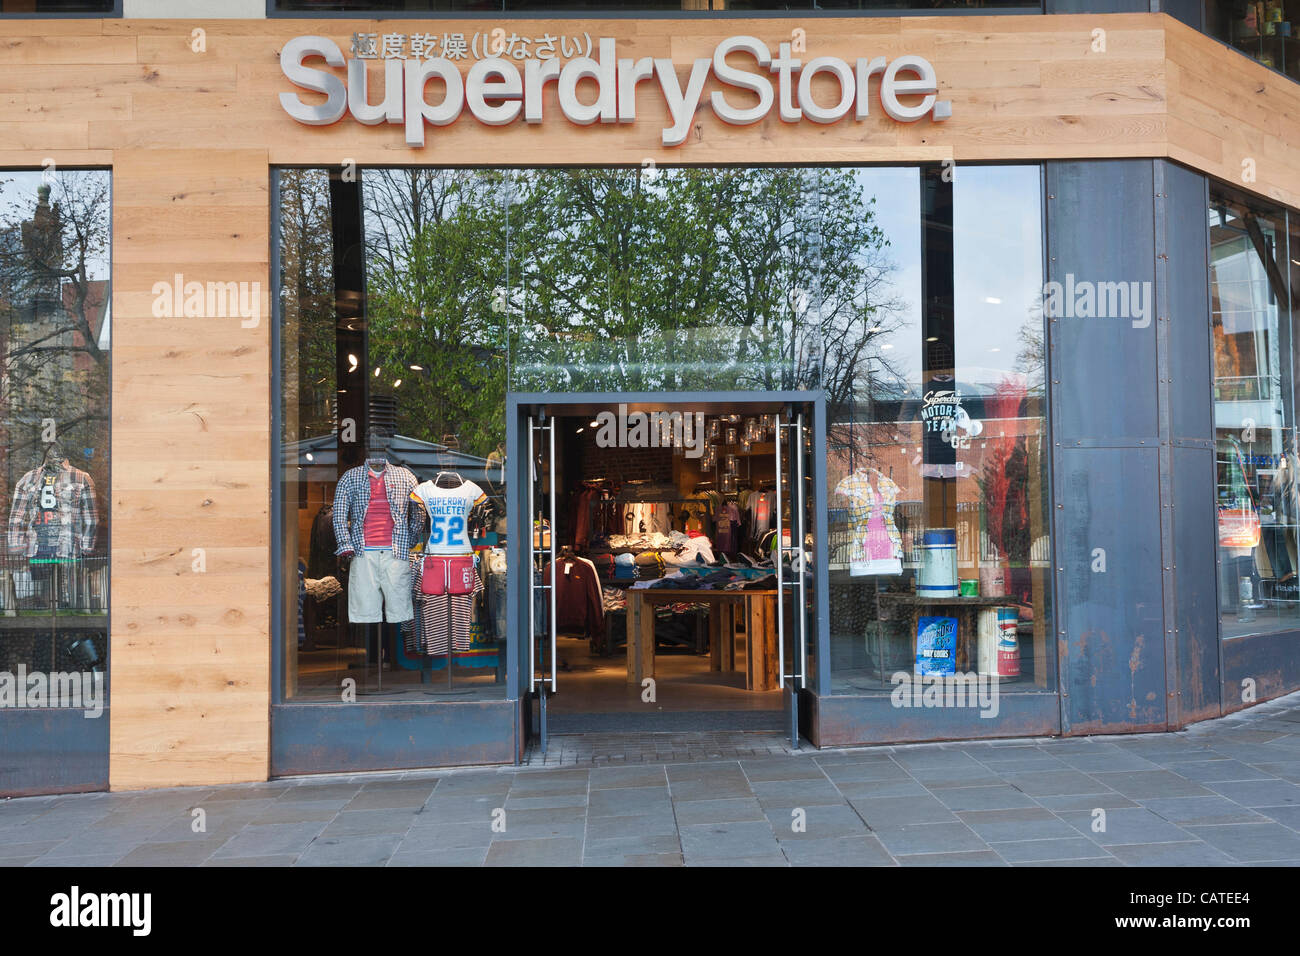 20/4/12, Superdry clothing store in Norwich, UK. Clothing chain SuperGroup stunned investors today by admitting it had got its sums wrong when forecasting its performance. The Superdry owner warned that profits will be much lower than the City expected. Stock Photo